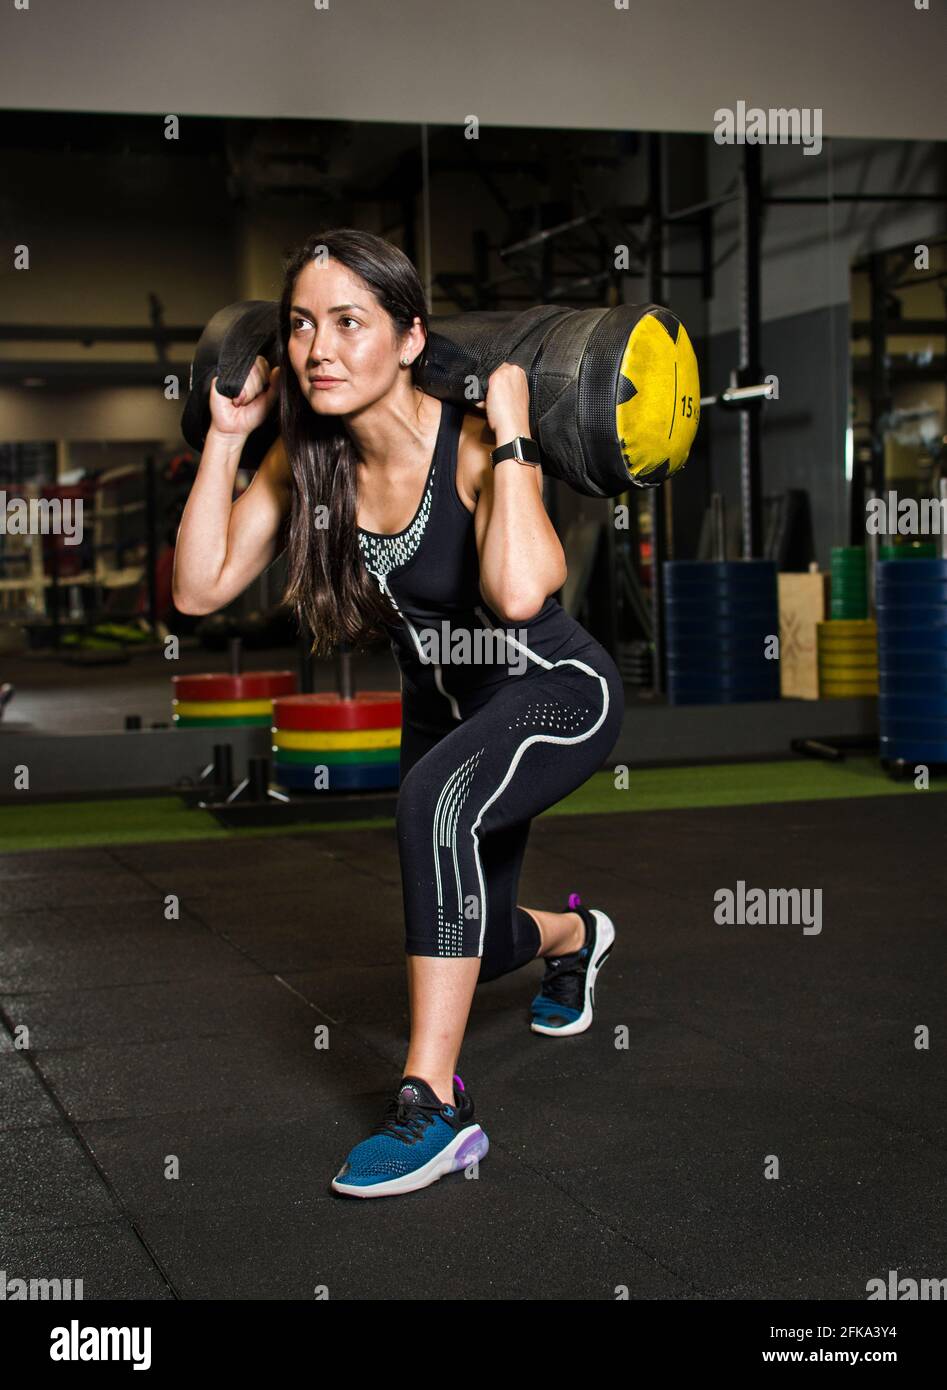 Fitness woman lifestyle workout concept Stock Photo